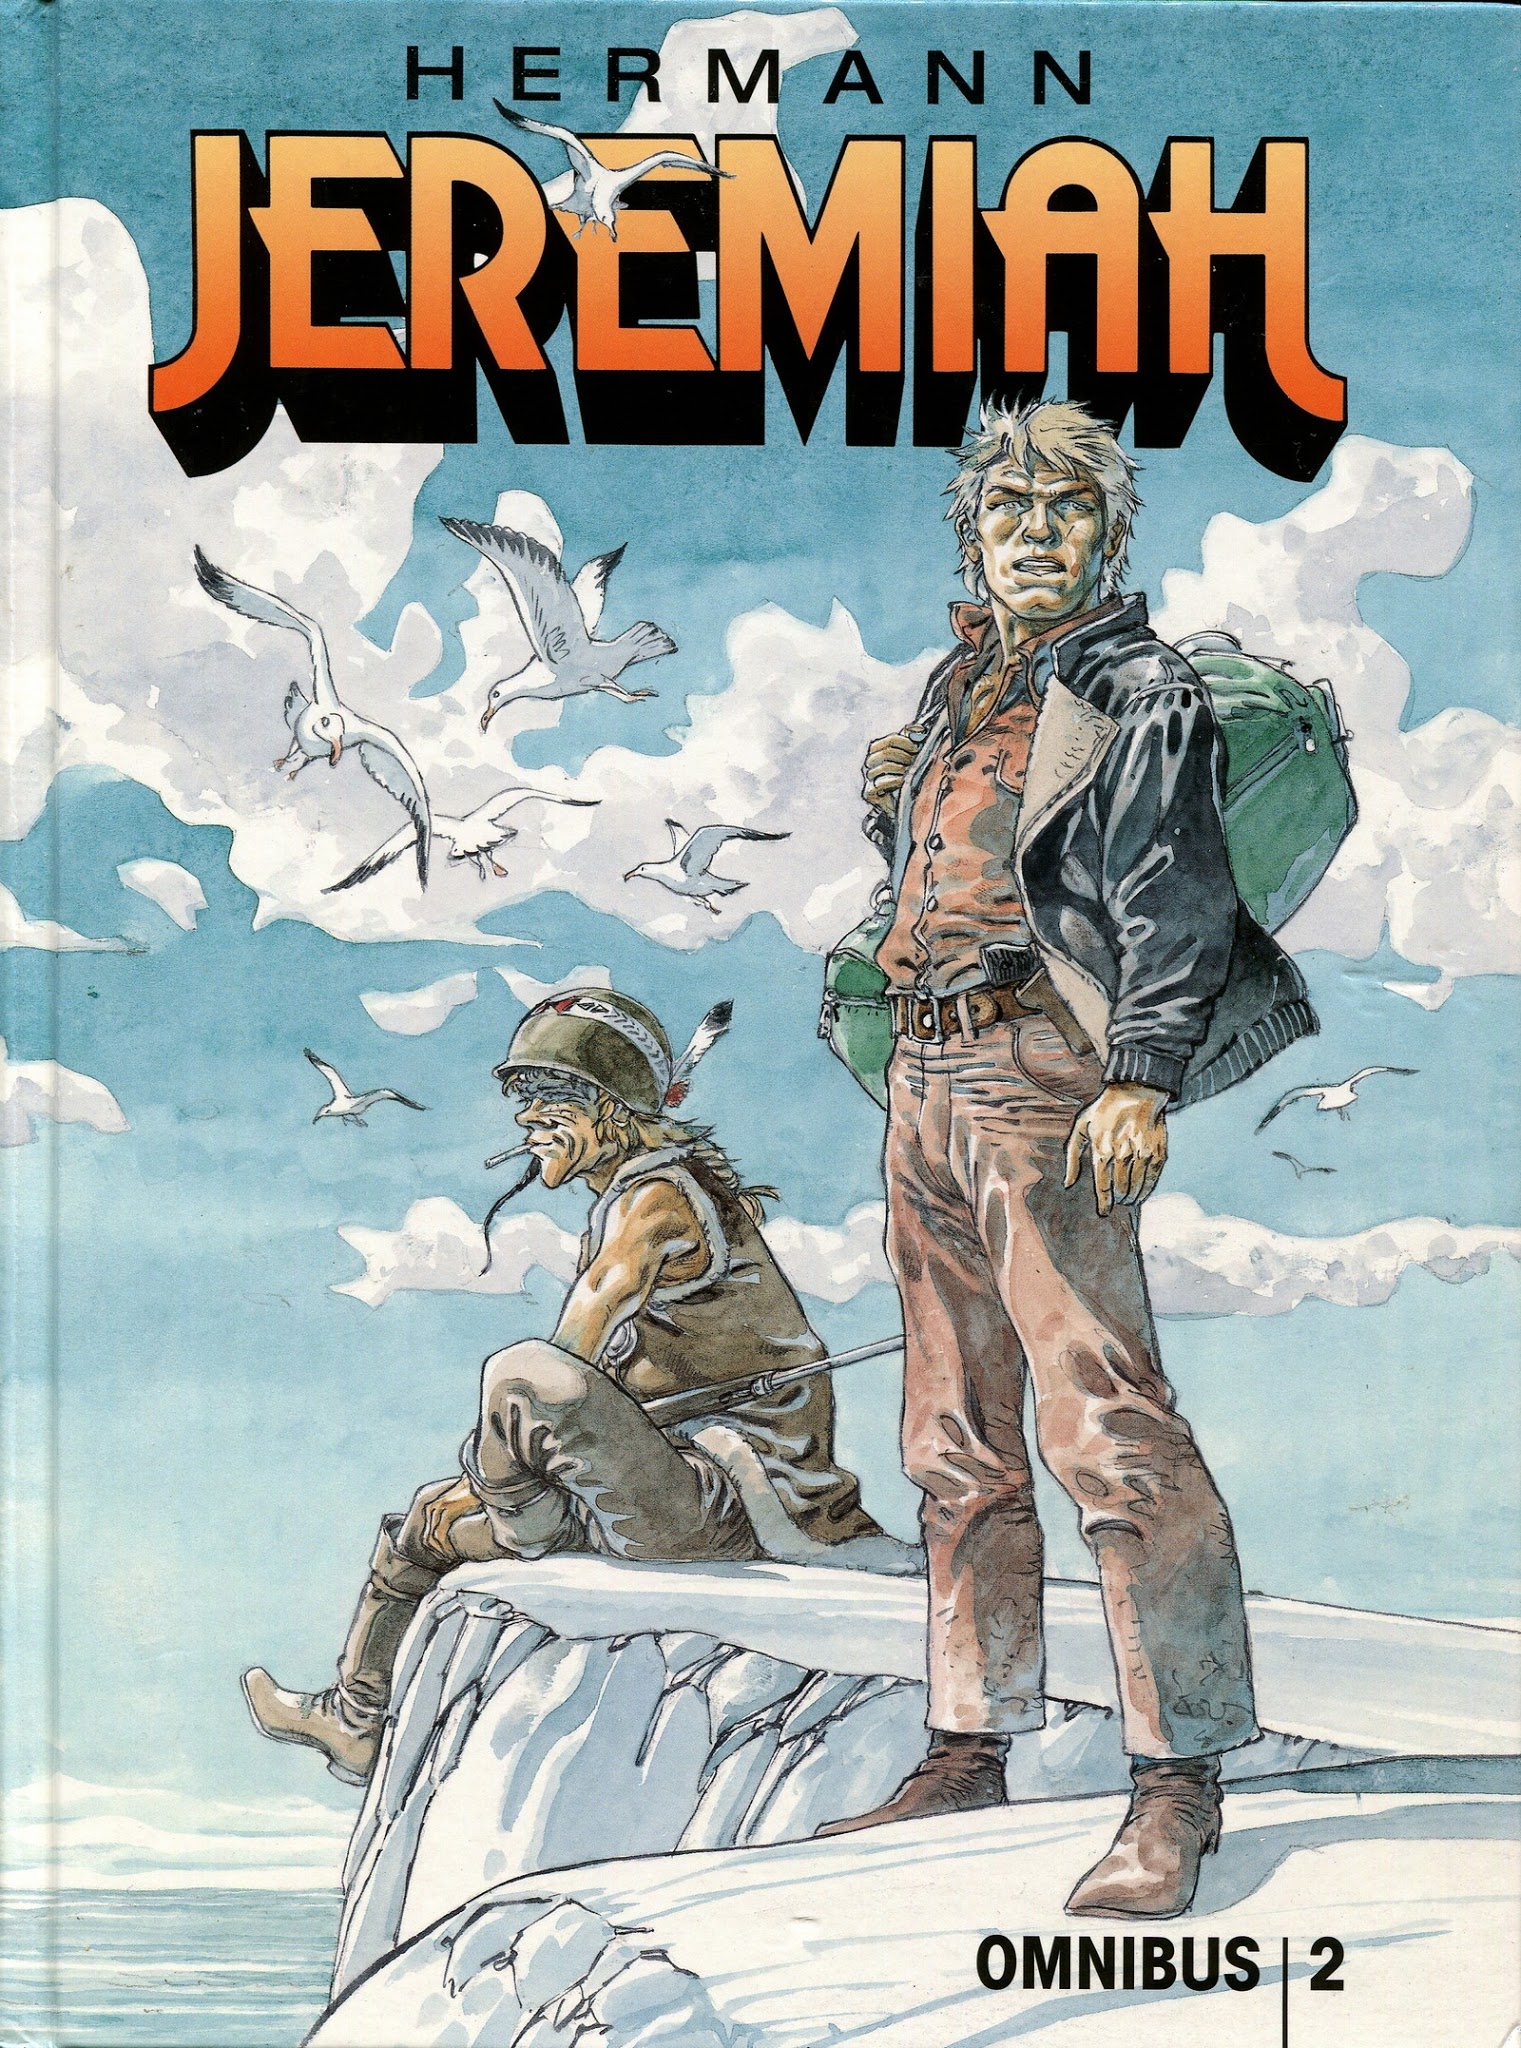 Read online Jeremiah by Hermann comic -  Issue # TPB 2 - 1